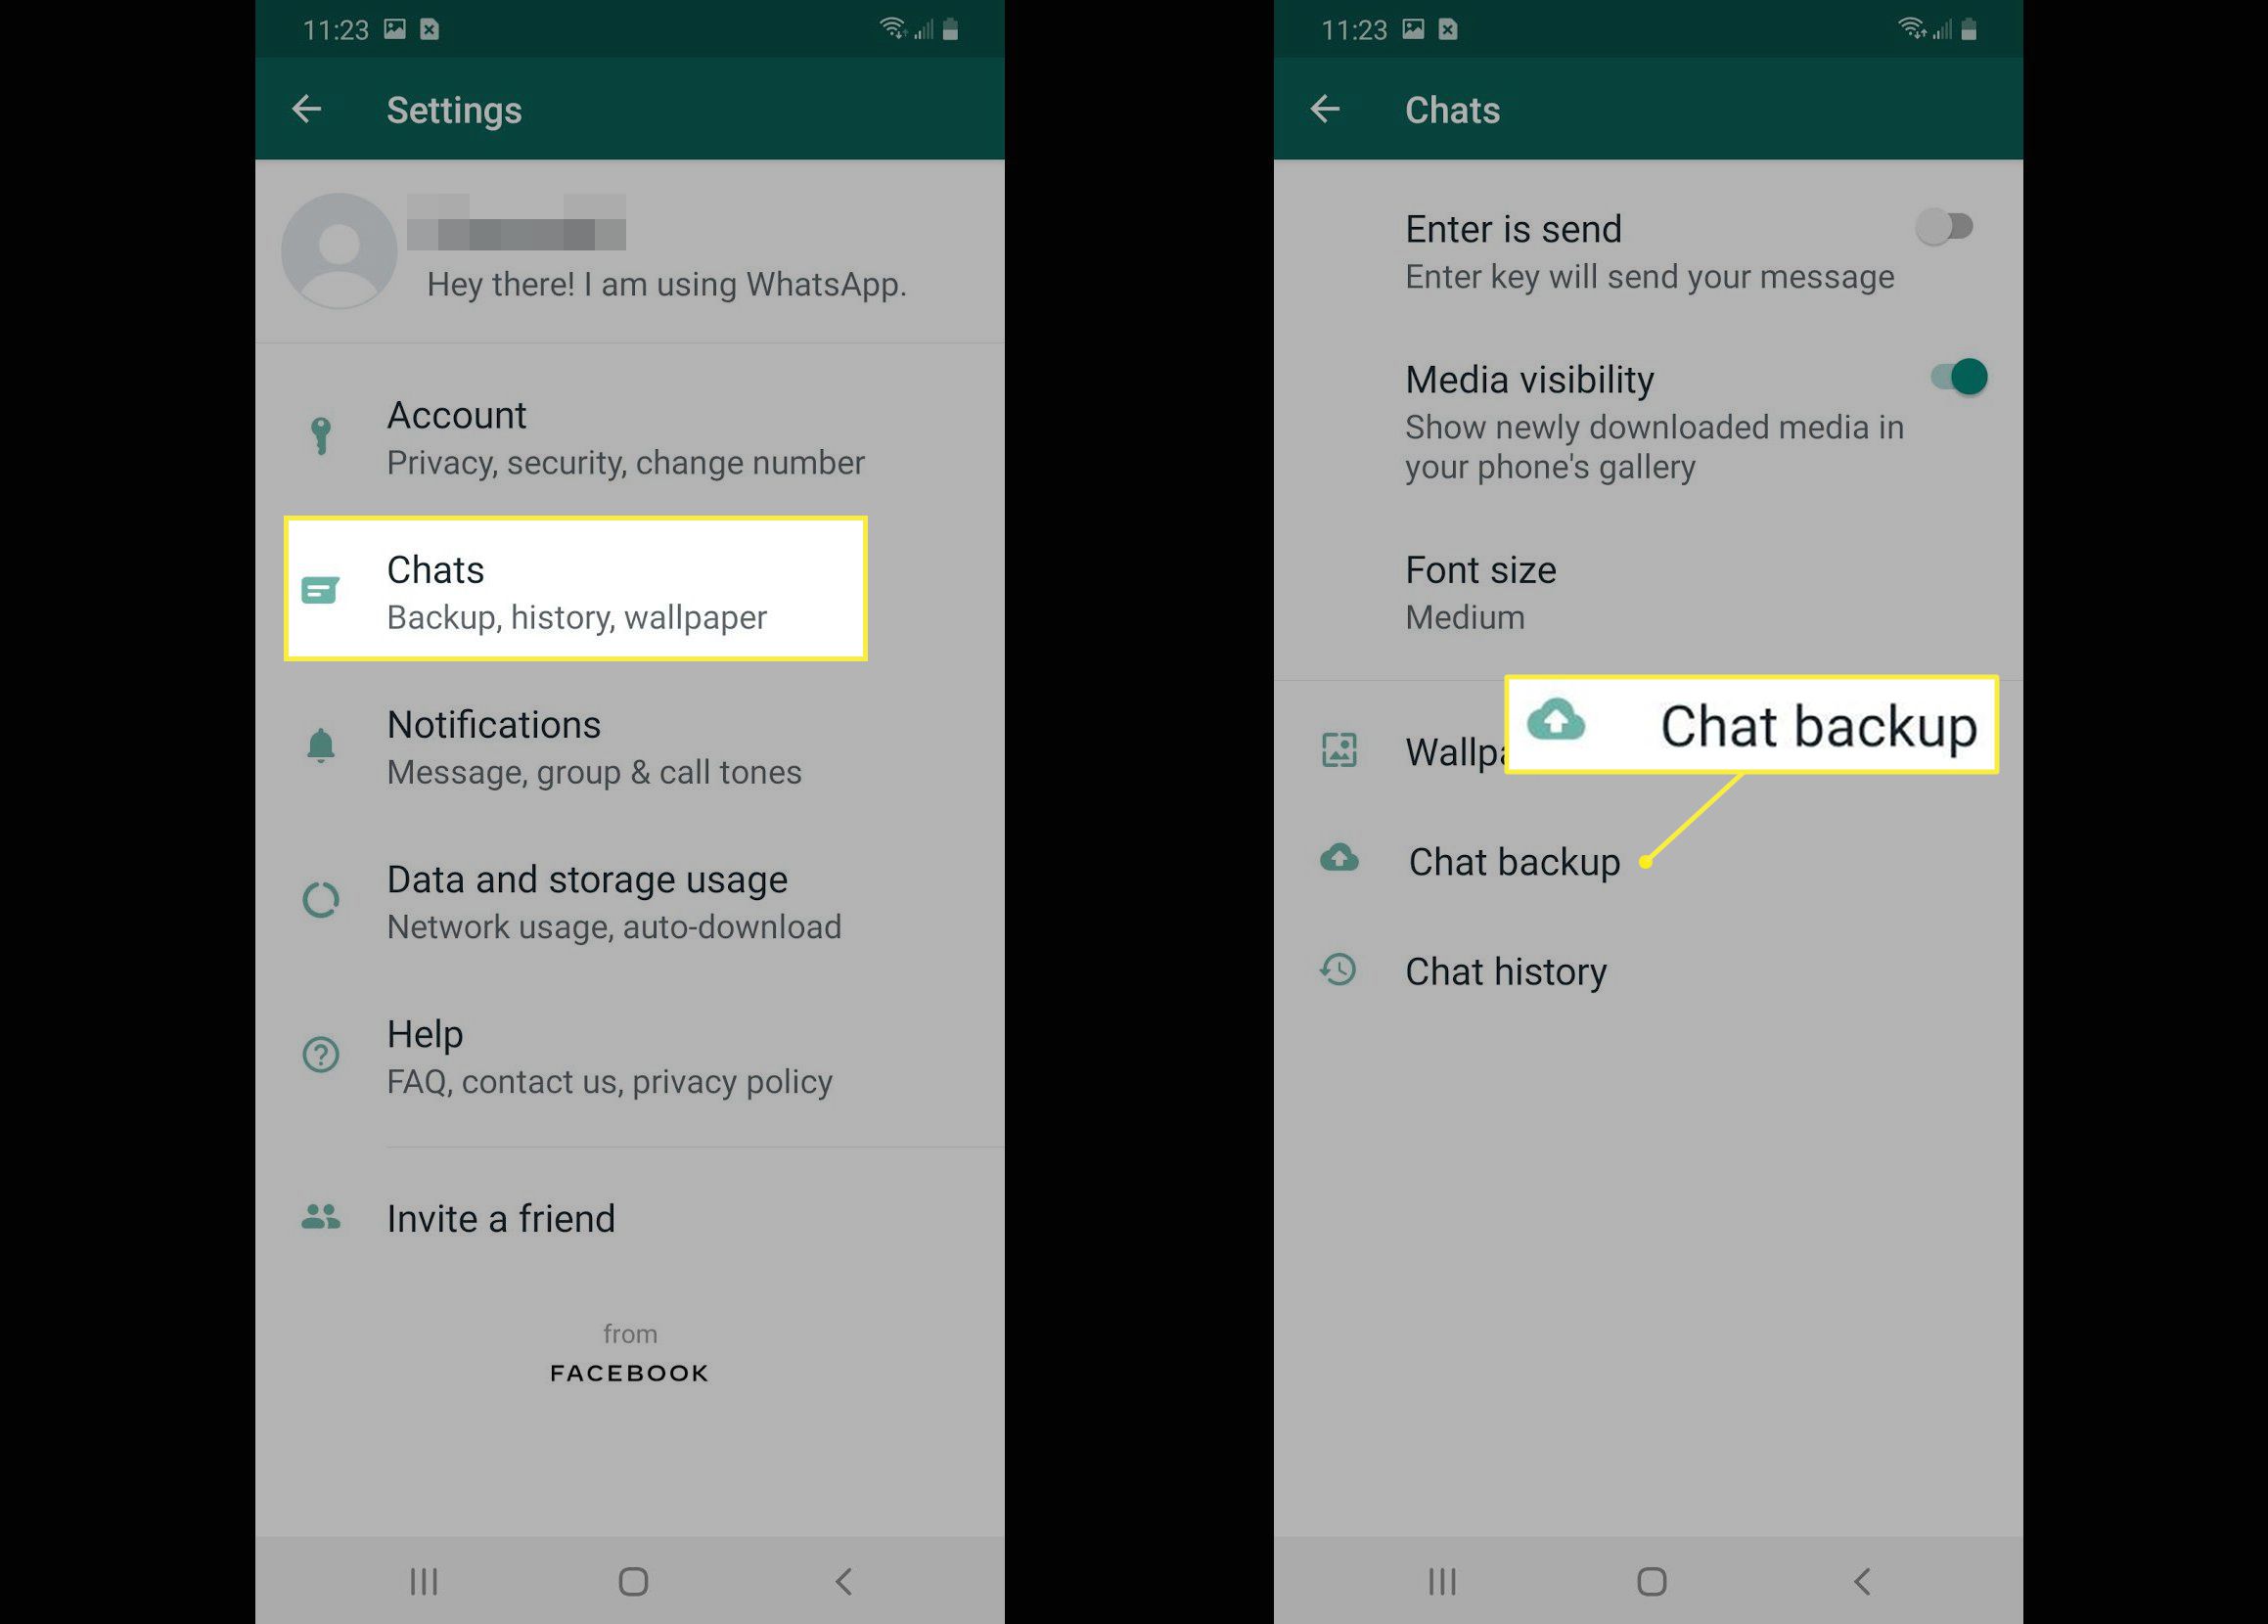 Chatback-up op Android